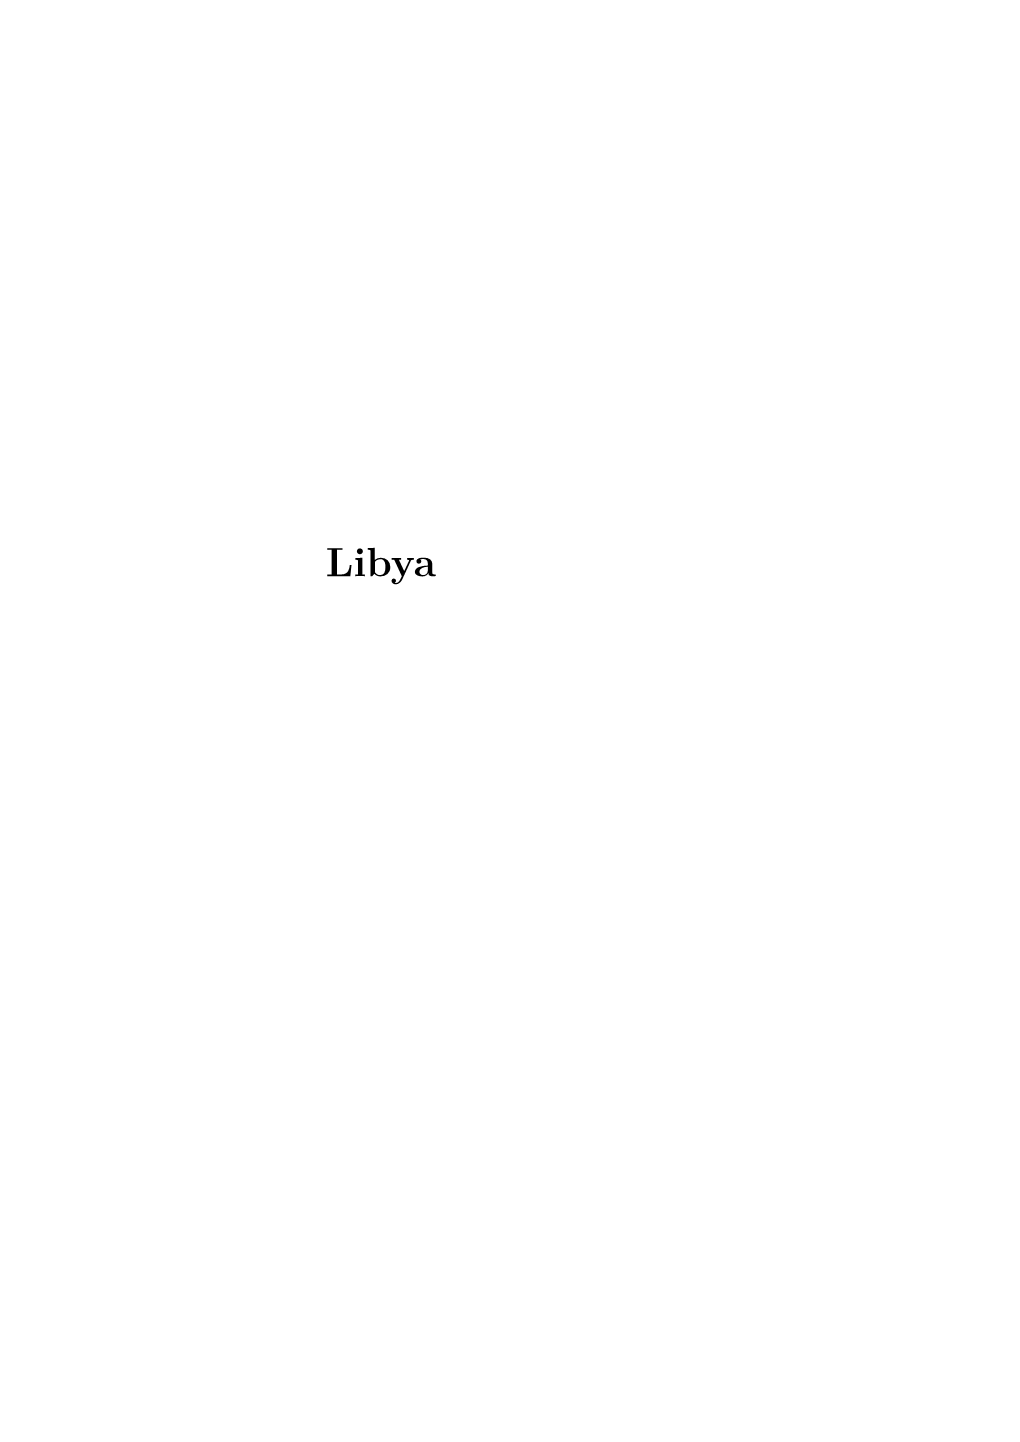 Conflicts in Libya